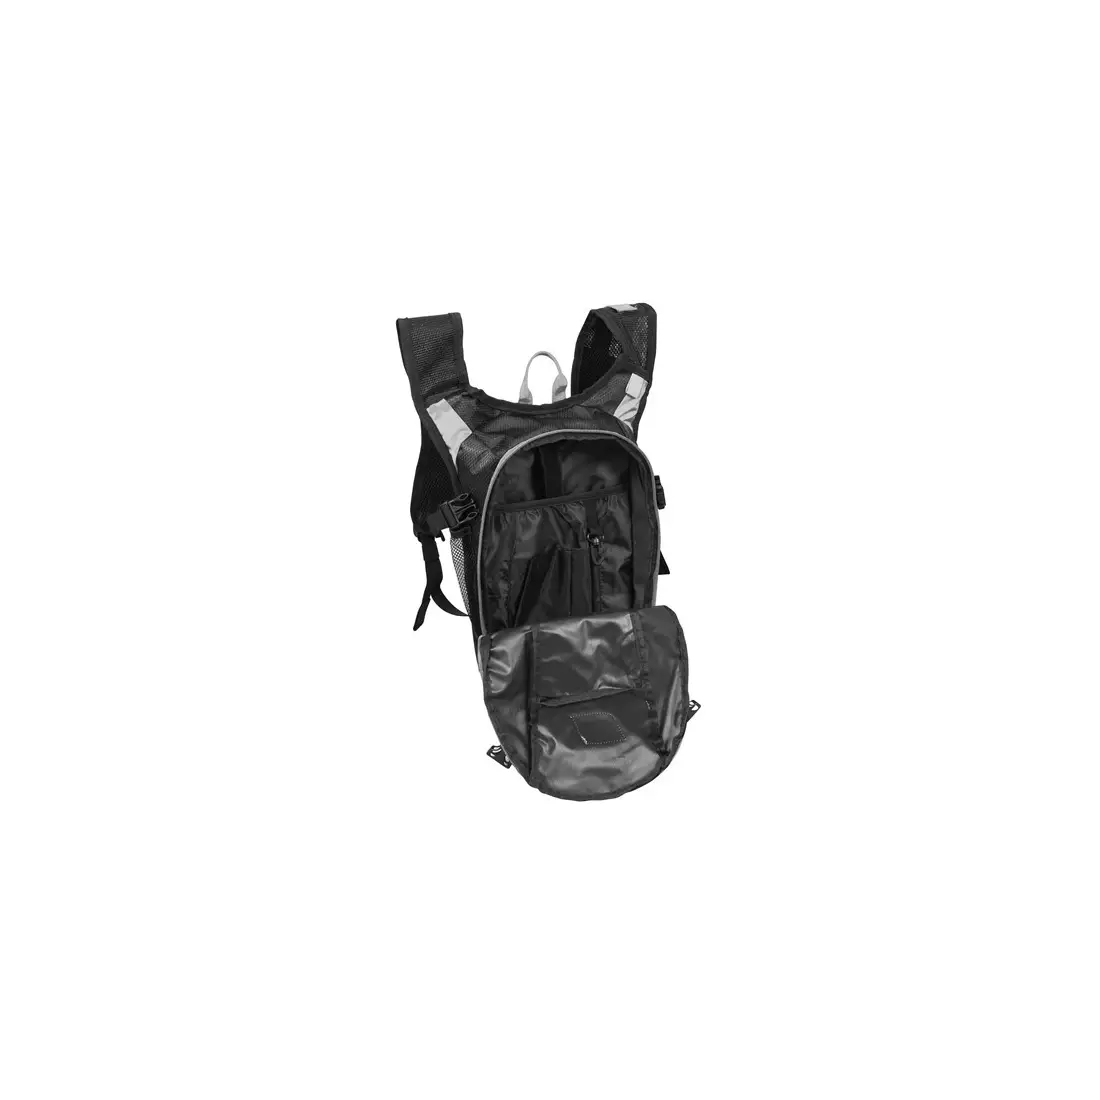 FORCE ARON PRO 10L backpack black and gray 8967024